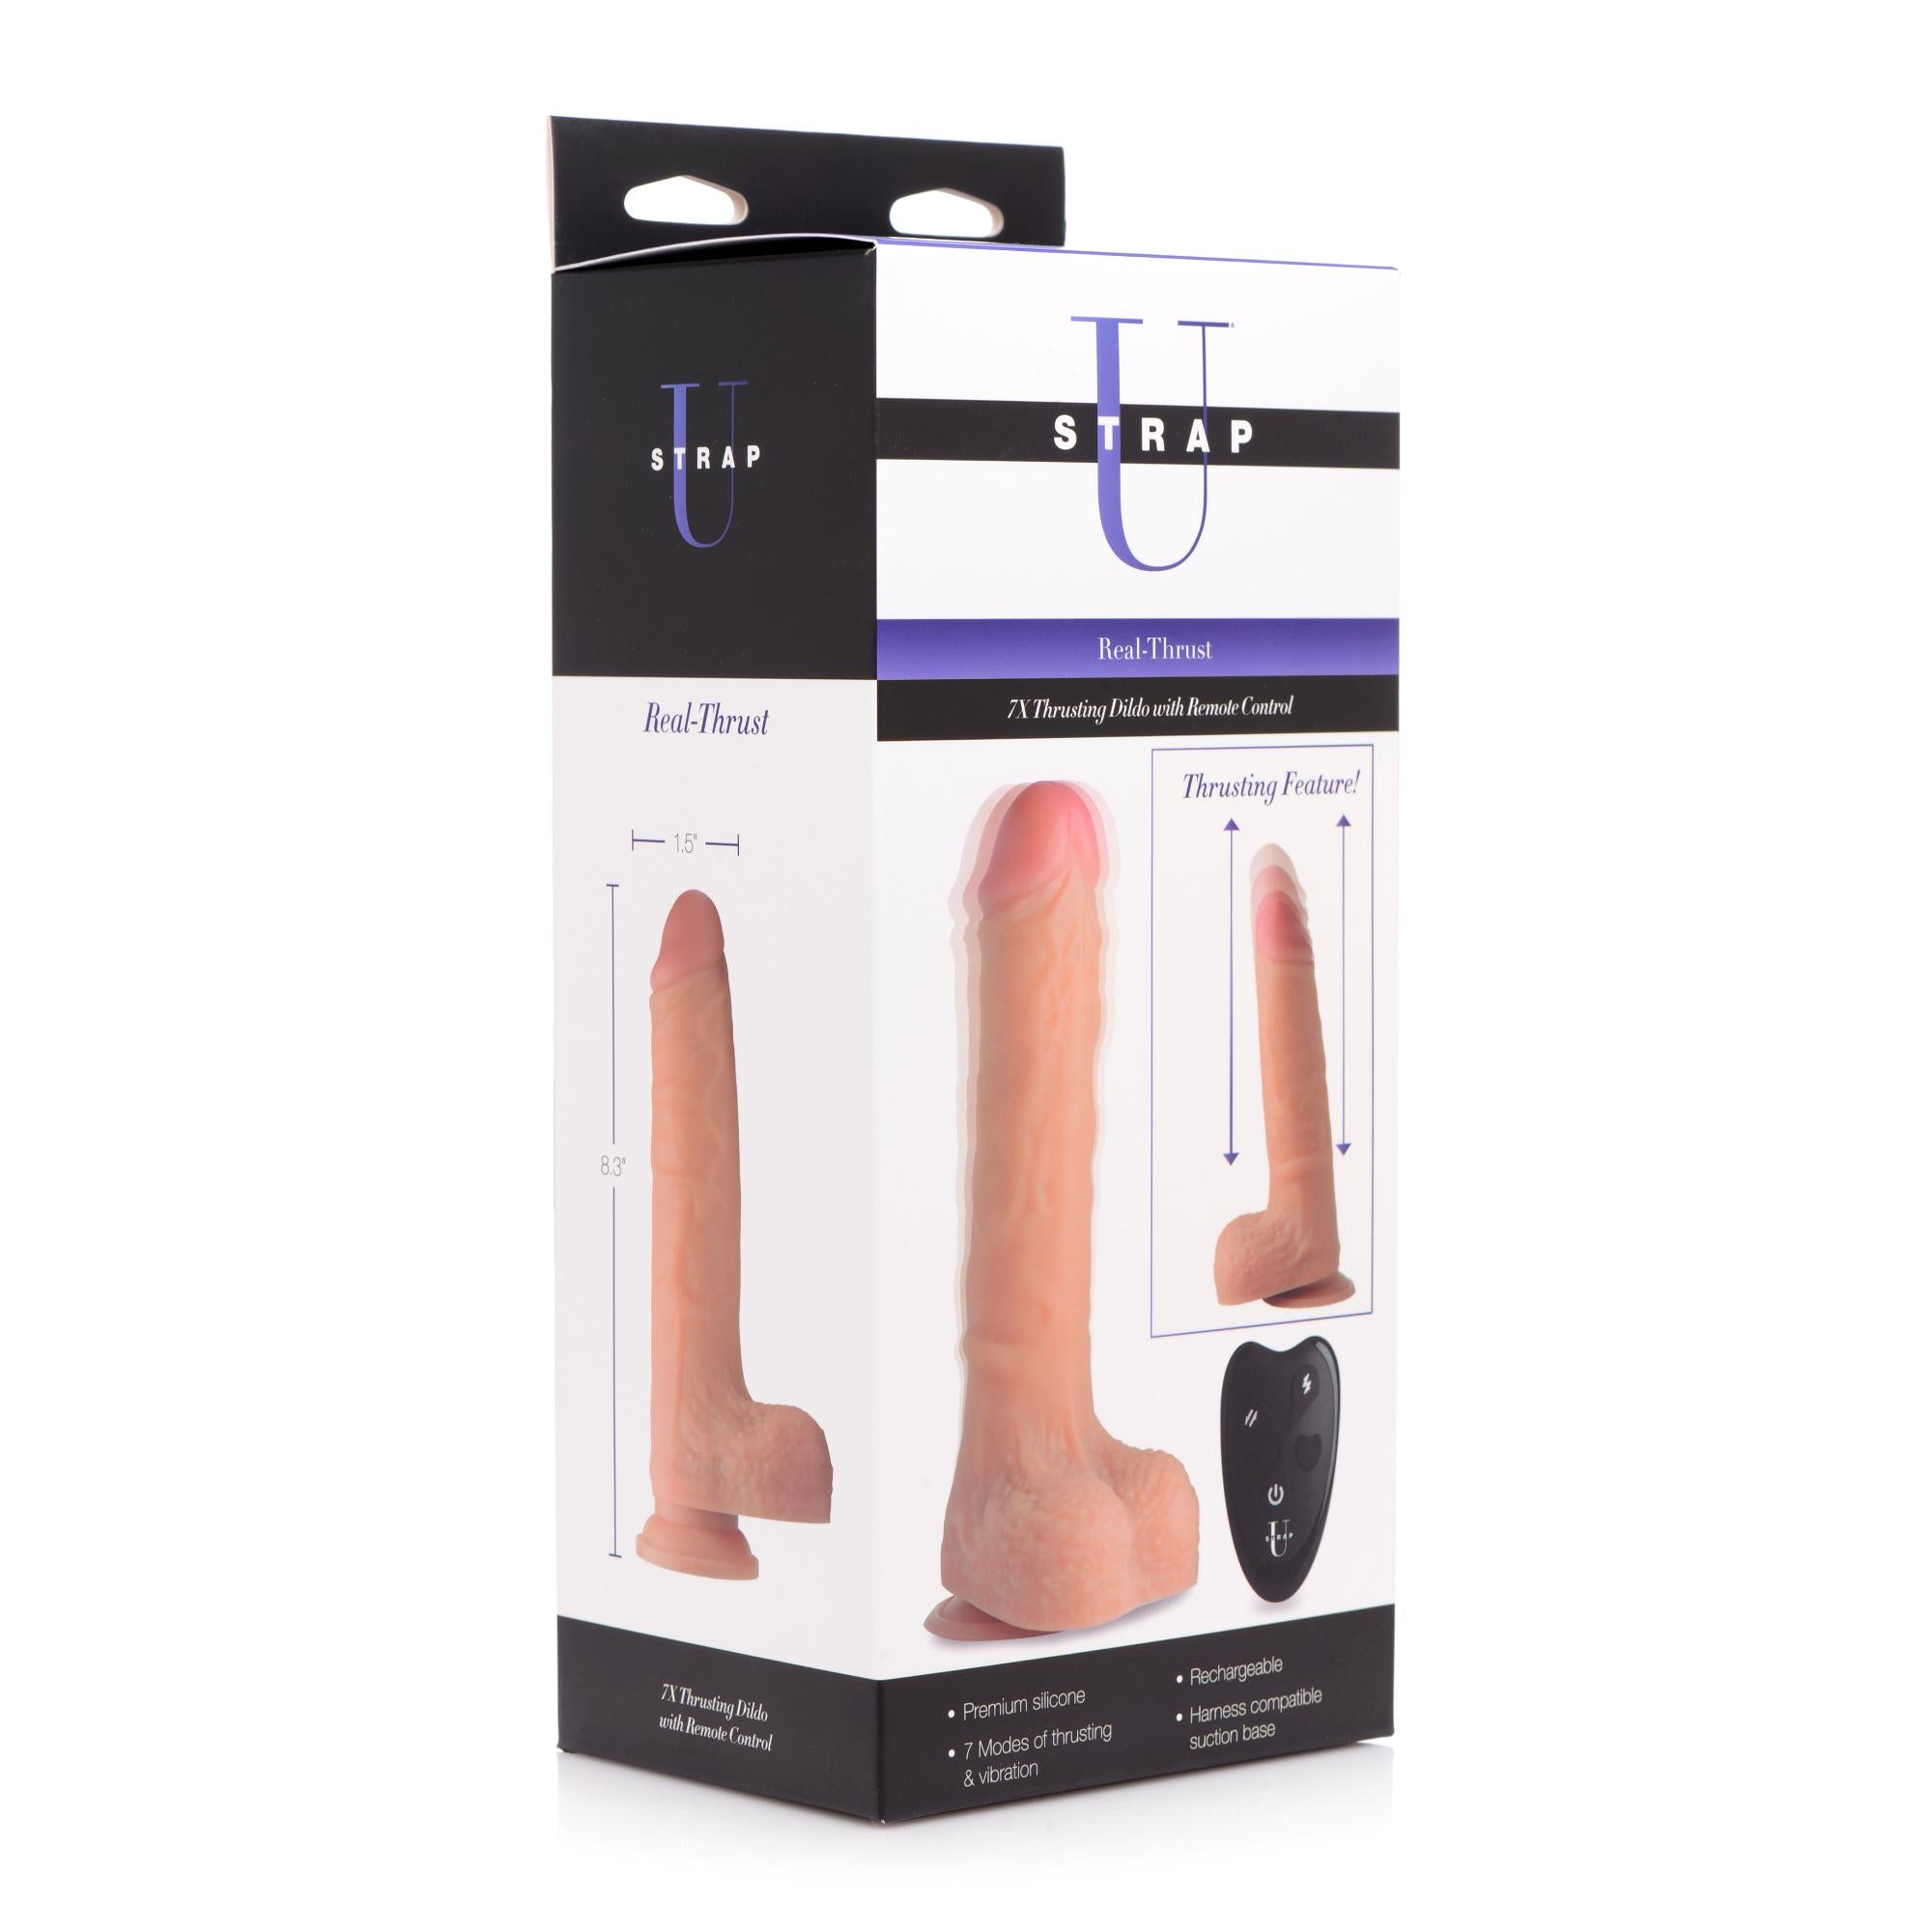 Strap U Real Thrust Thrusting and Vibrating Silicone Dildo